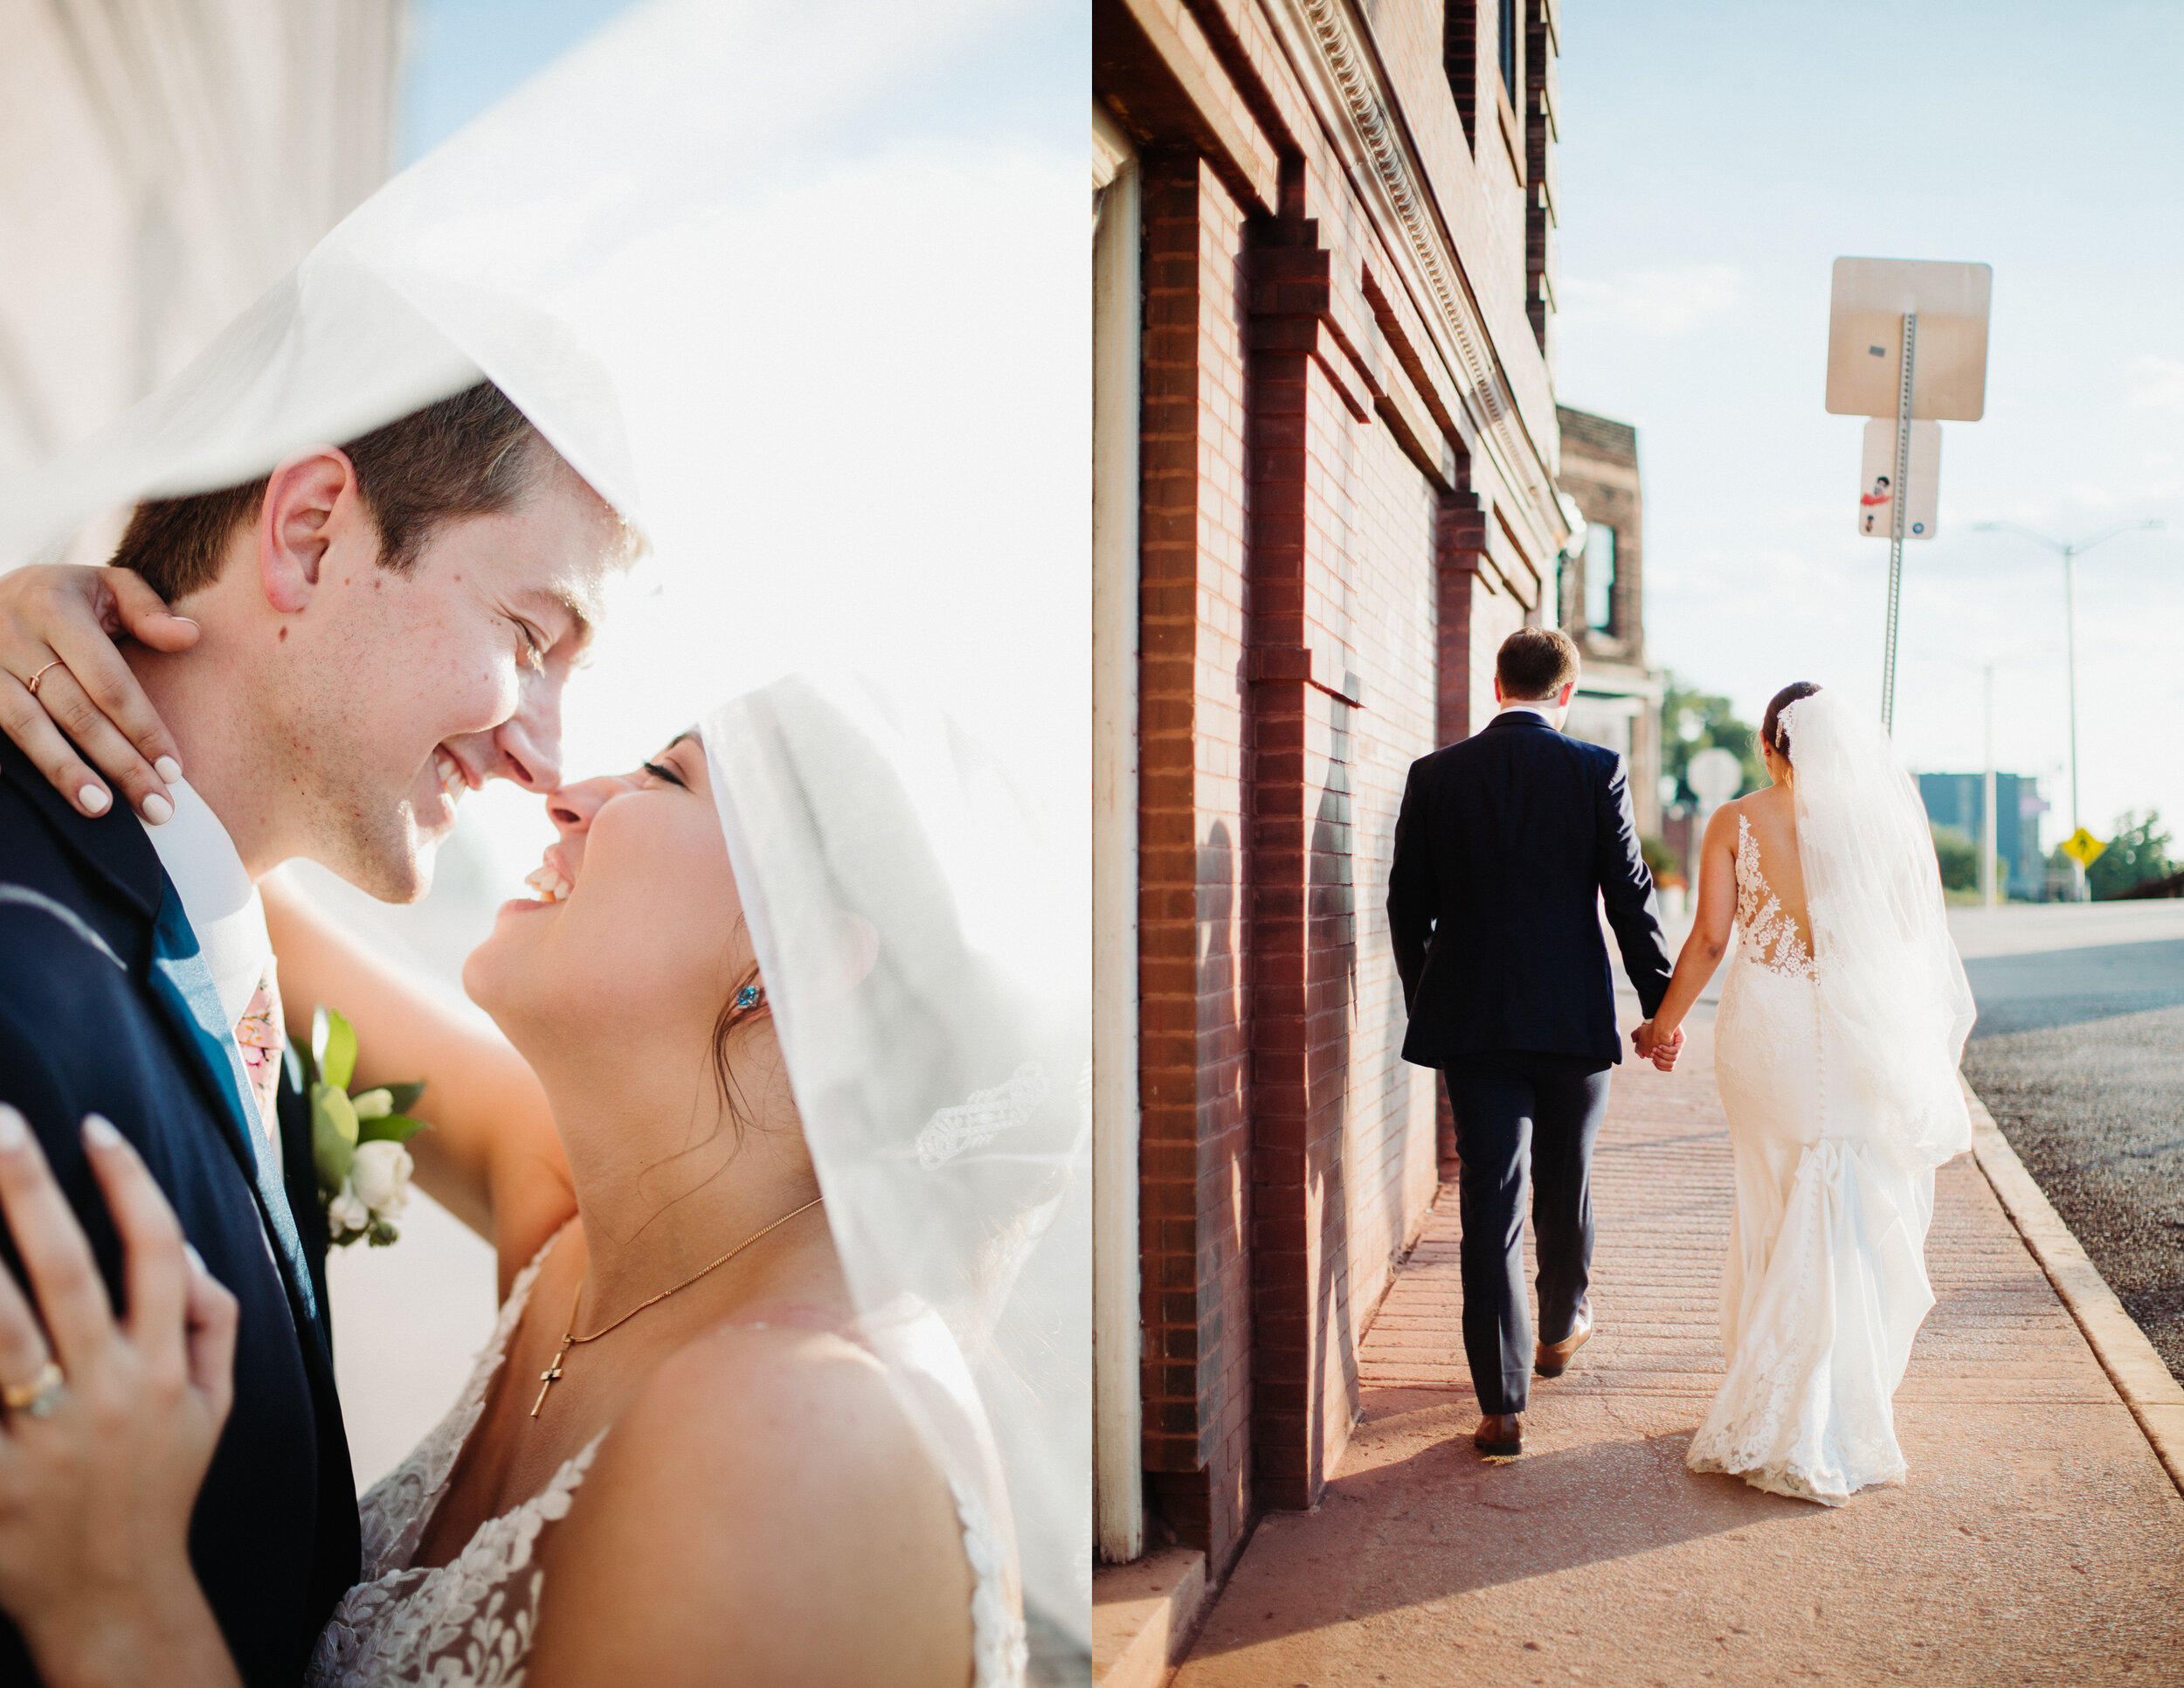 Bride and groom portraits after an elegant indoor summer wedding in Tennessee